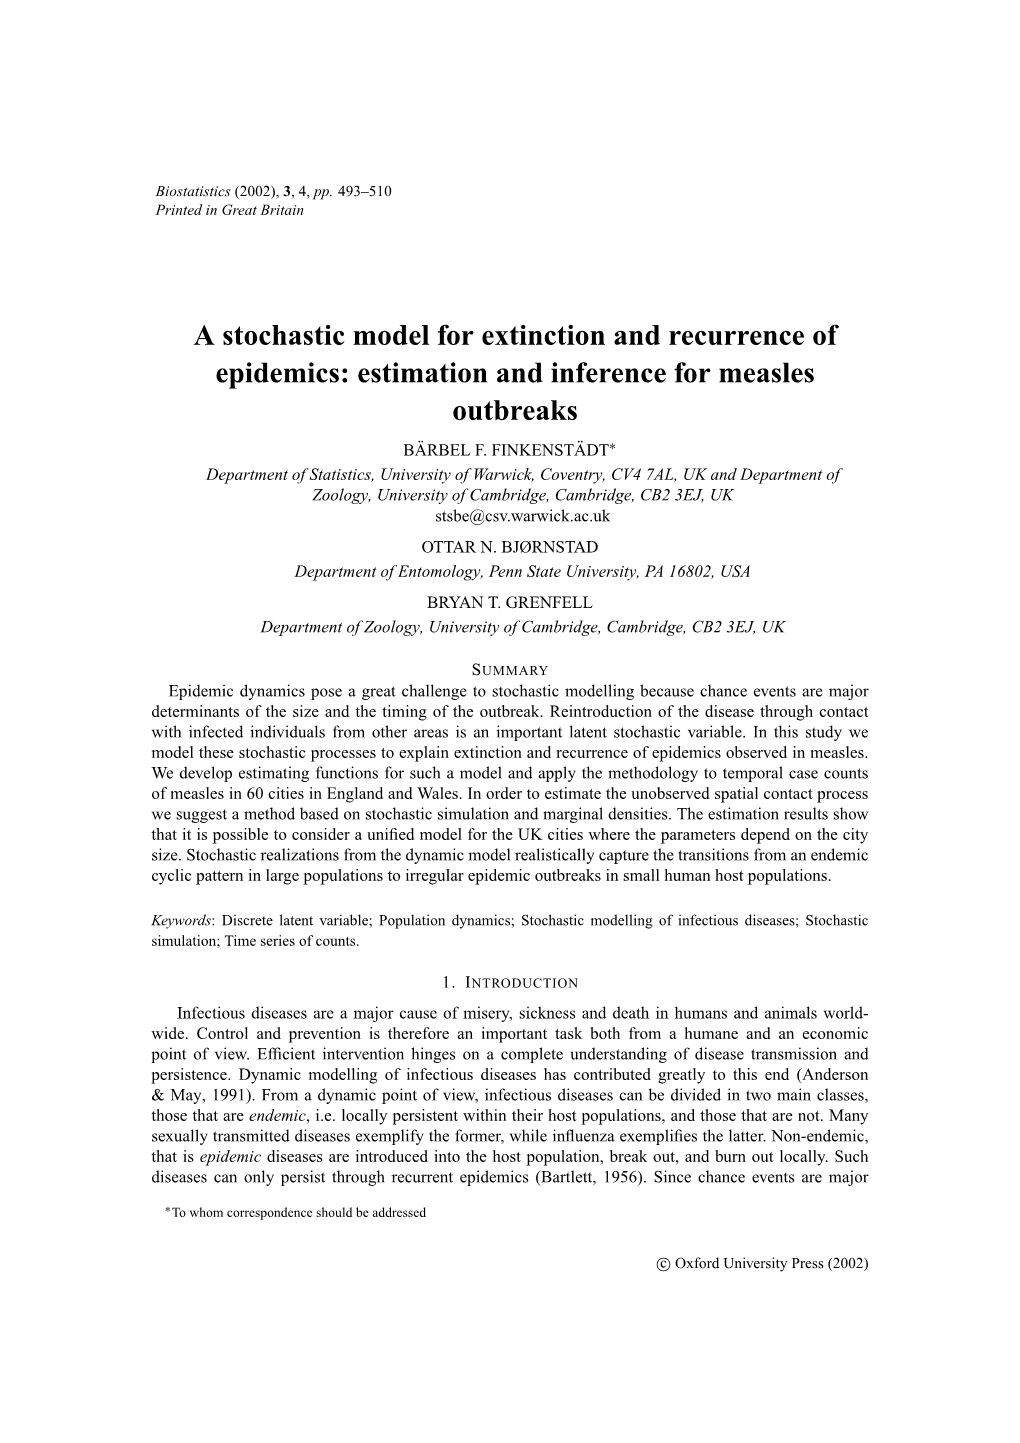 A Stochastic Model for Extinction and Recurrence of Epidemics: Estimation and Inference for Measles Outbreaks BARBEL¨ F